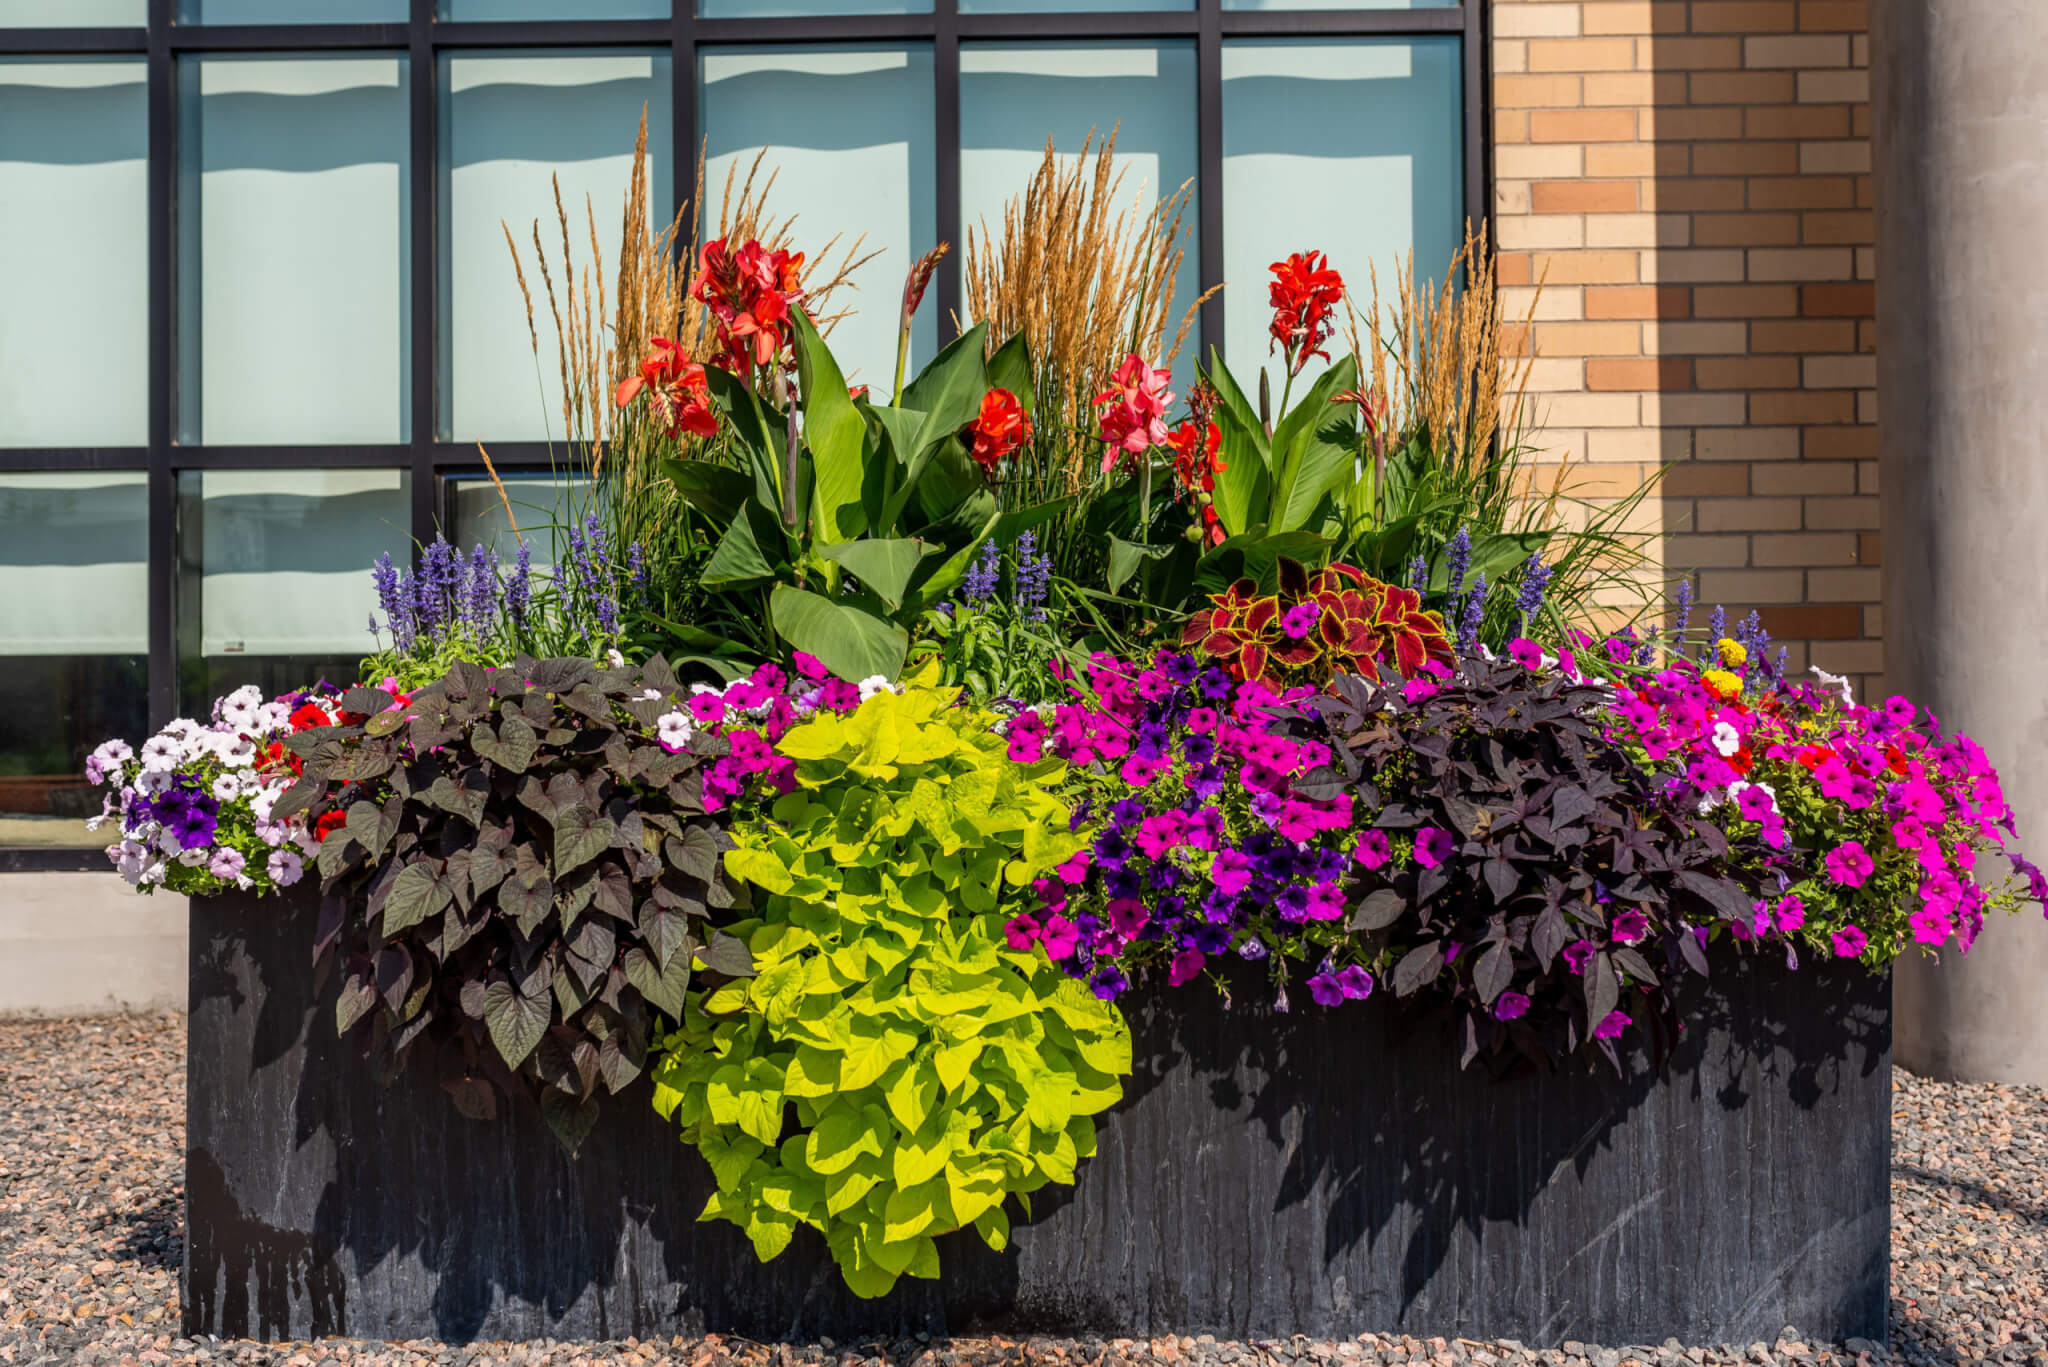 A big black stone flower pot is filled with different types of plants and colour flower plants